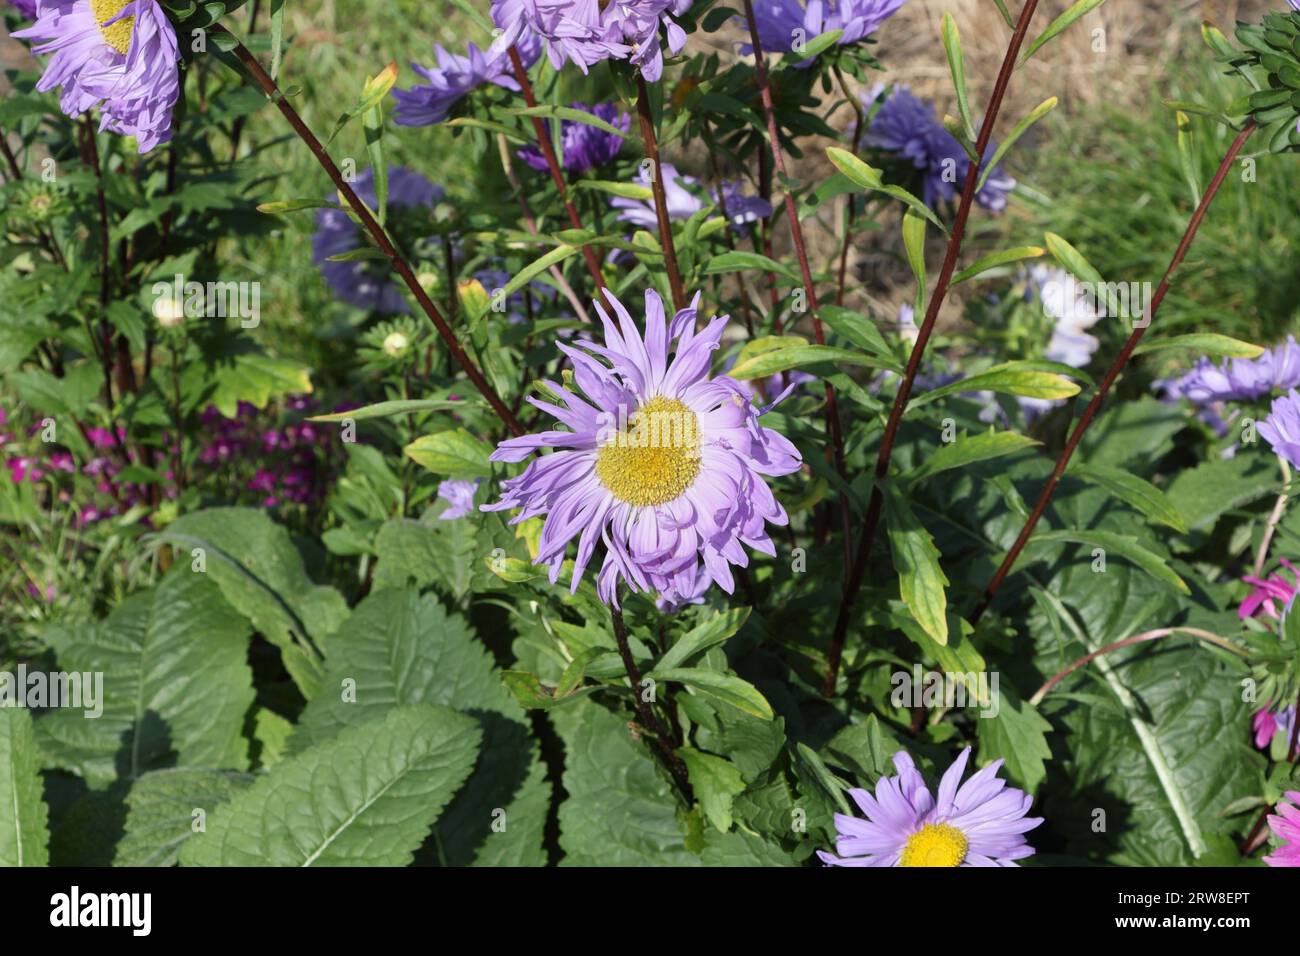 Aster Lady in Blue flower Violet petals yellow centre novi-belgii Stock Photo